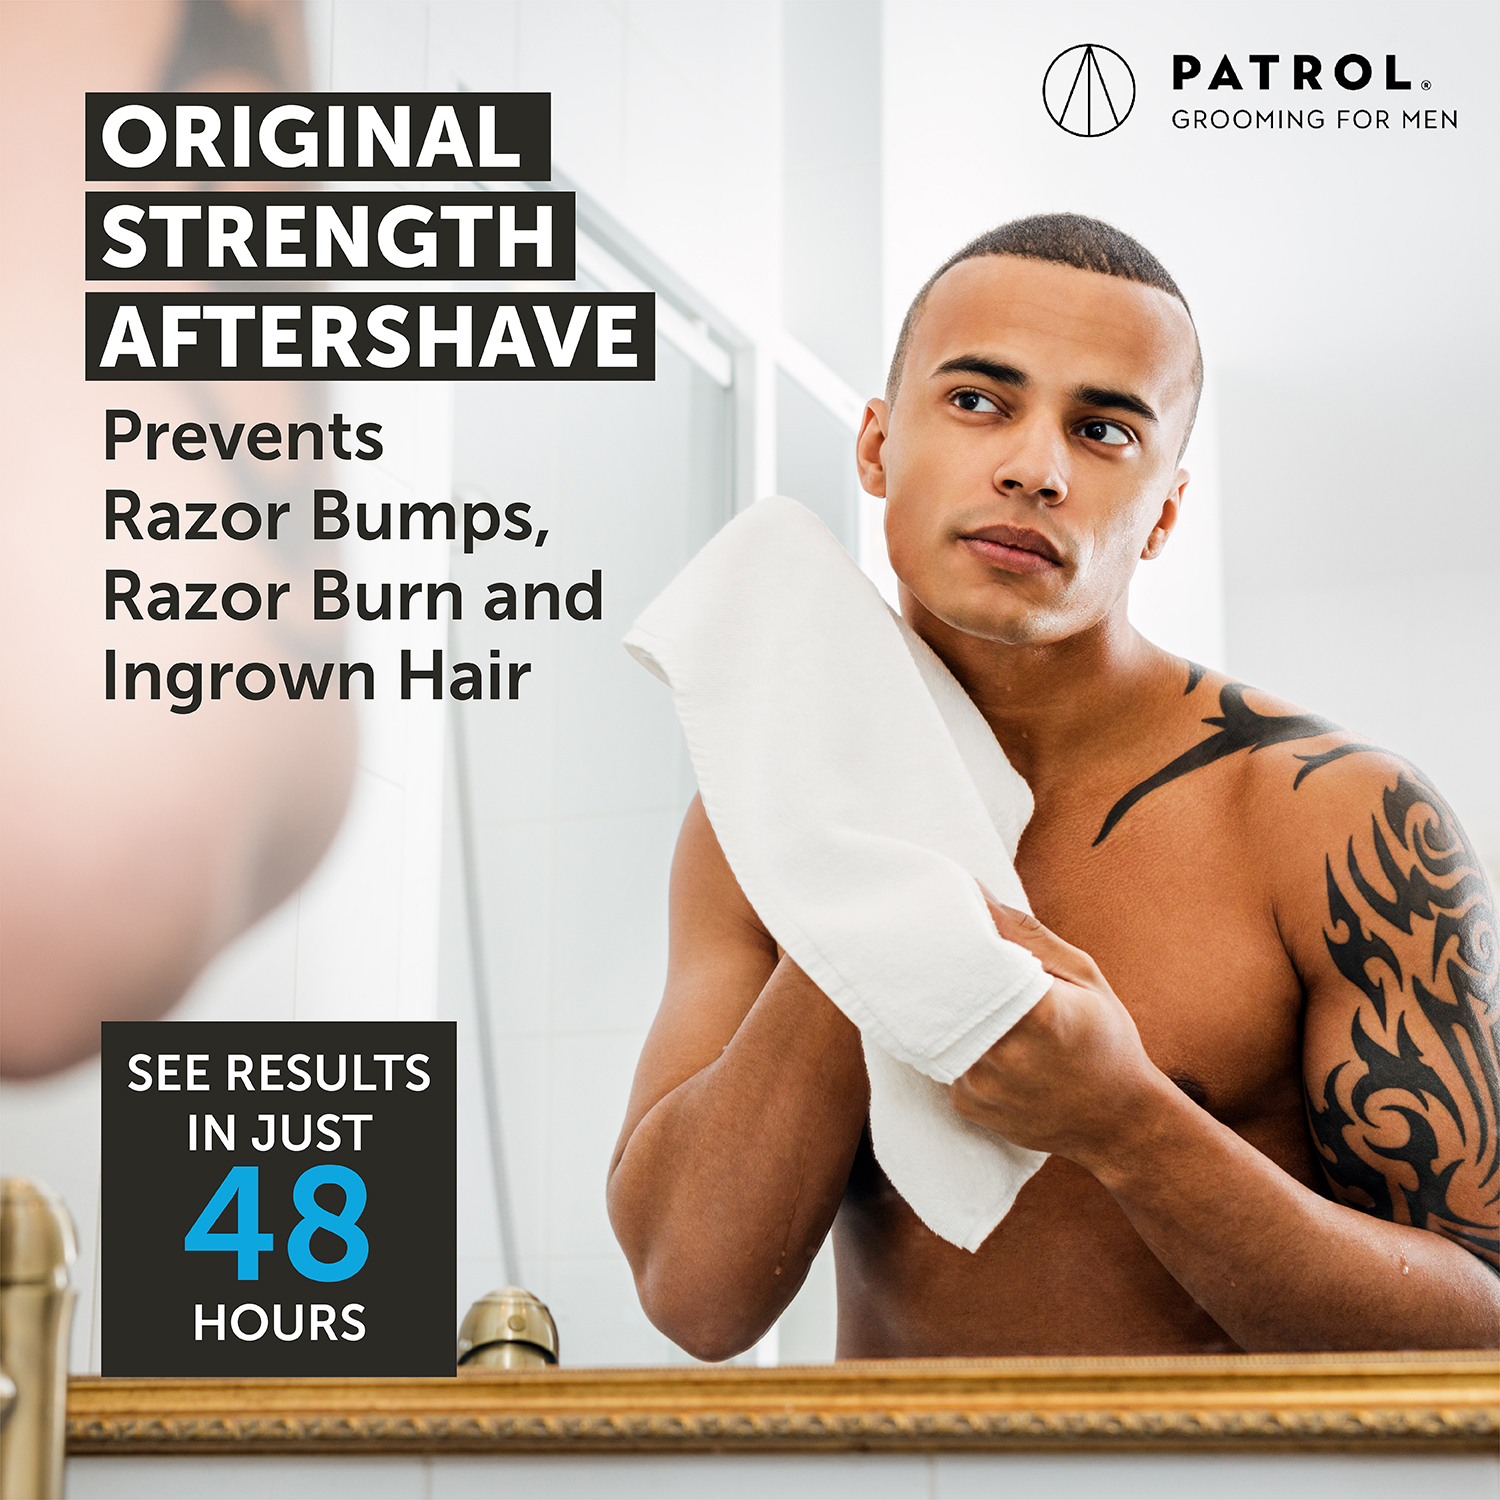 Bump Patrol Original Aftershave for Razor Bumps and Ingrown Hair - image 4 of 7